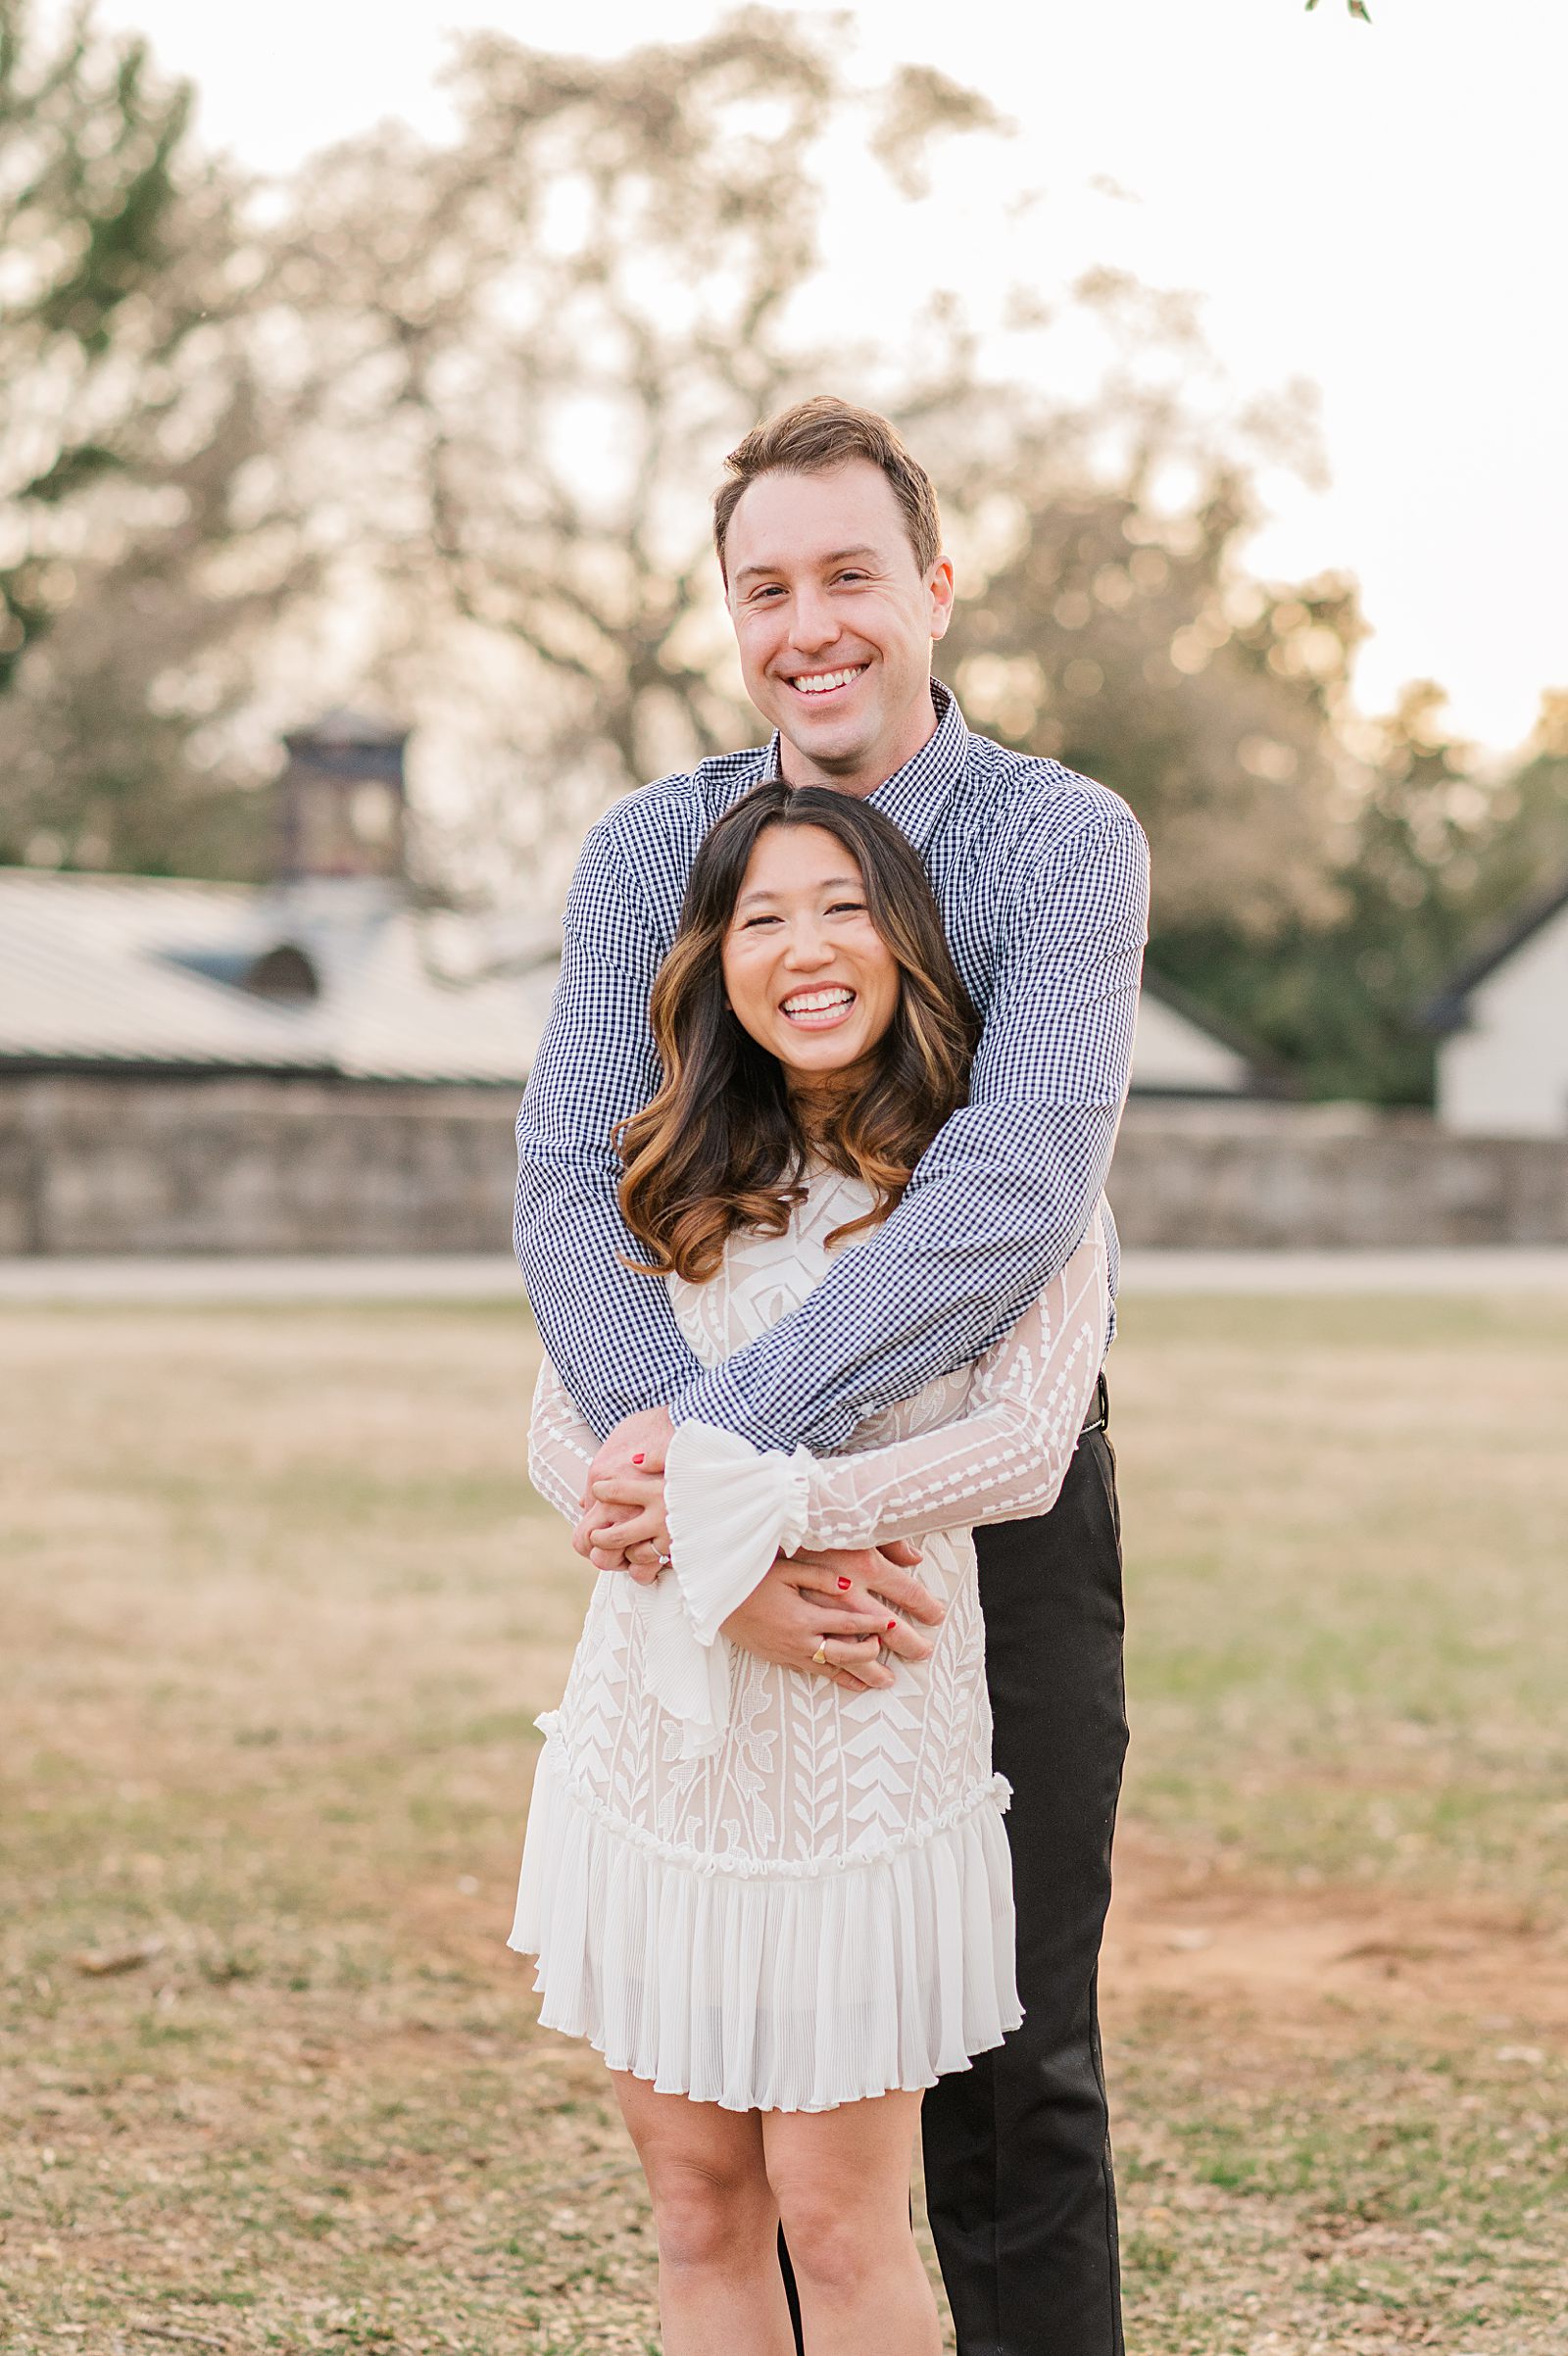 A Spring Maymont Engagement Session by Virginia Wedding Photographer Kailey Brianne Photography. 